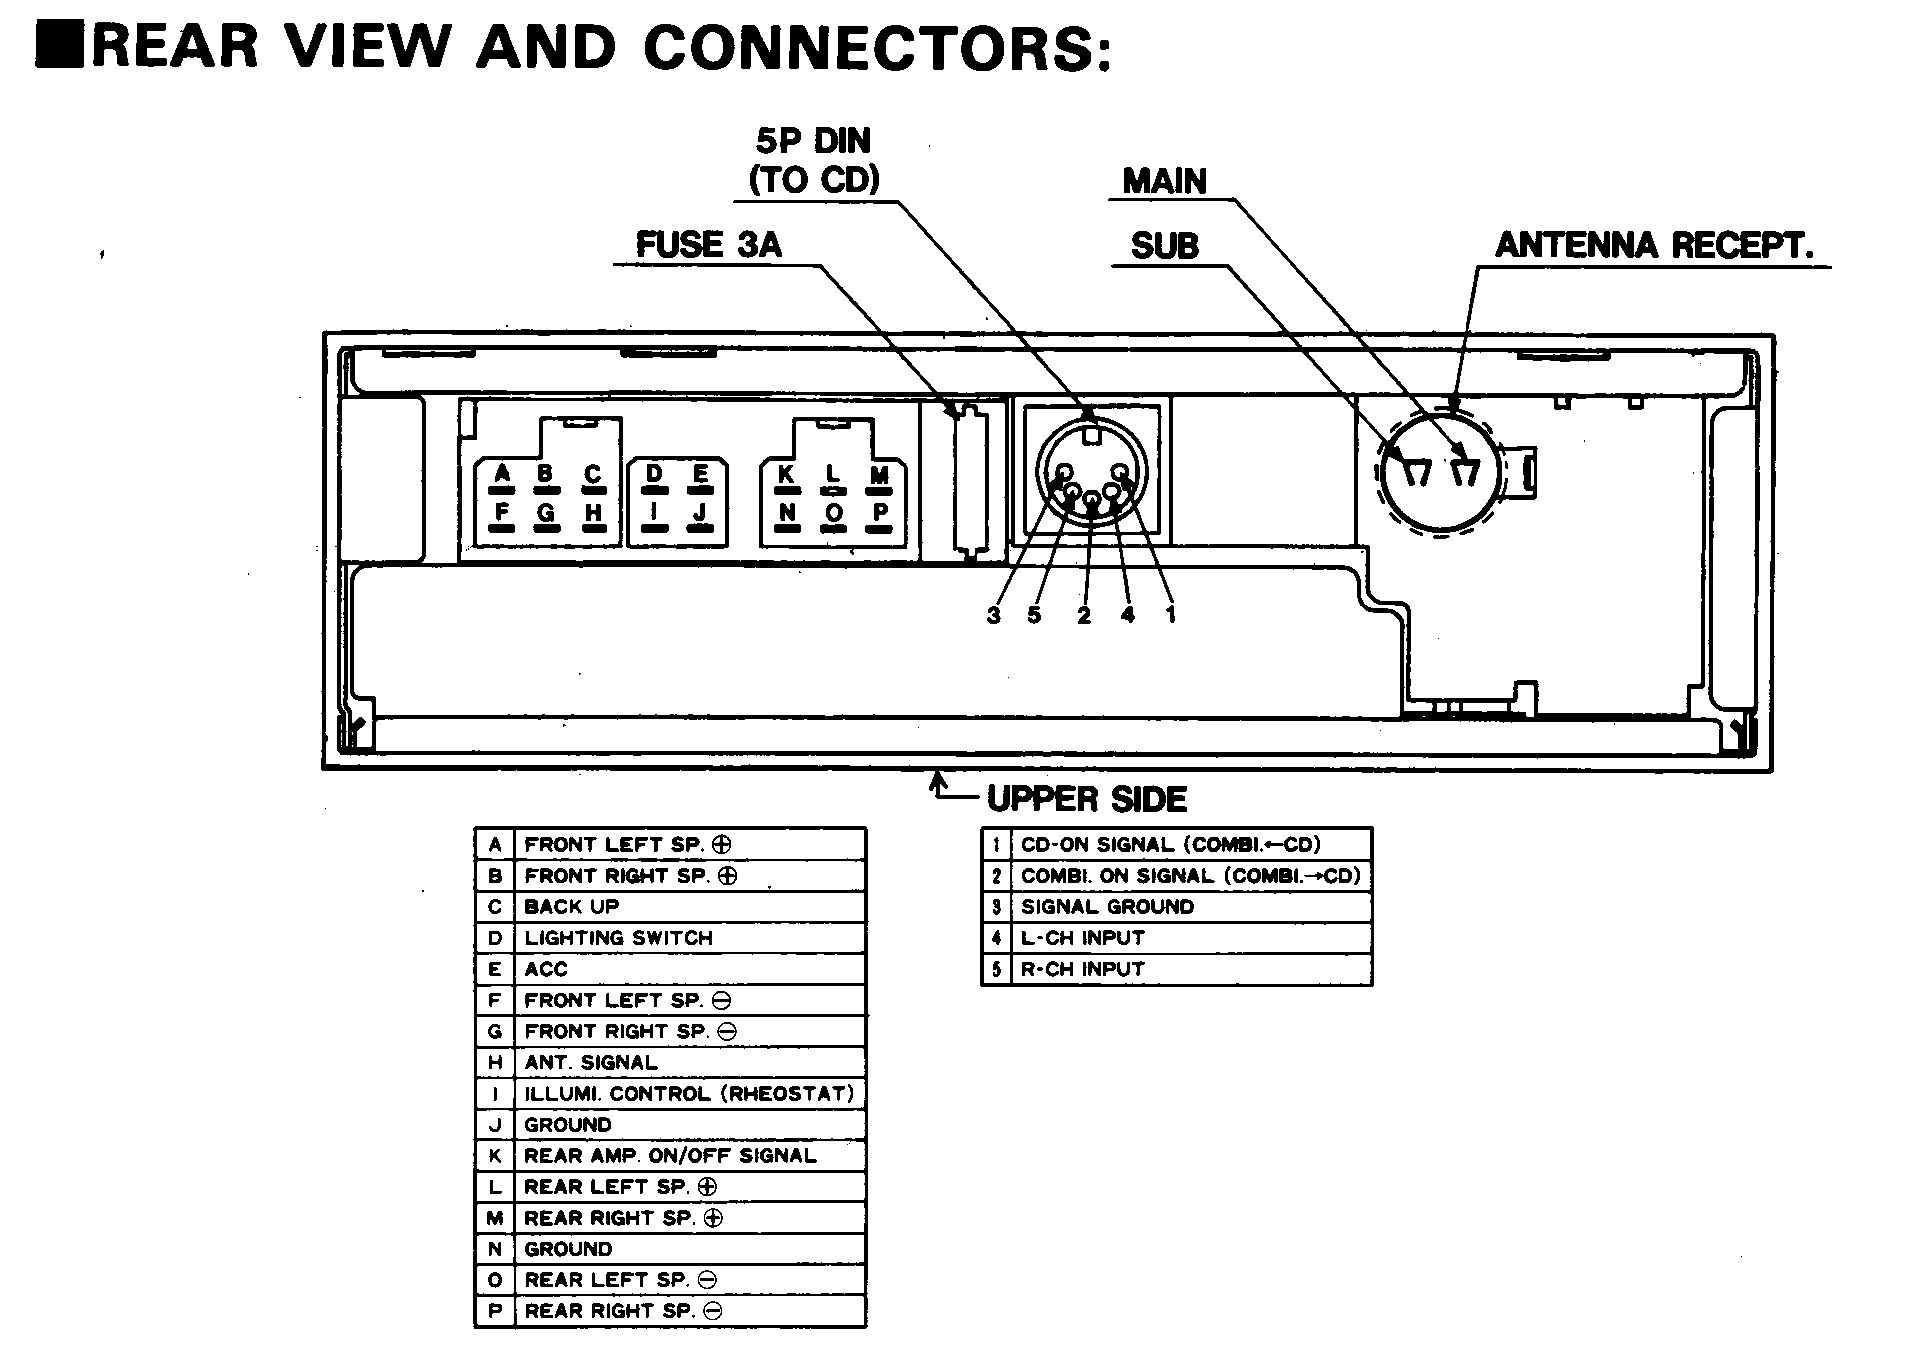 Car Stereo Amp Wiring Diagram from carstereohelp.net